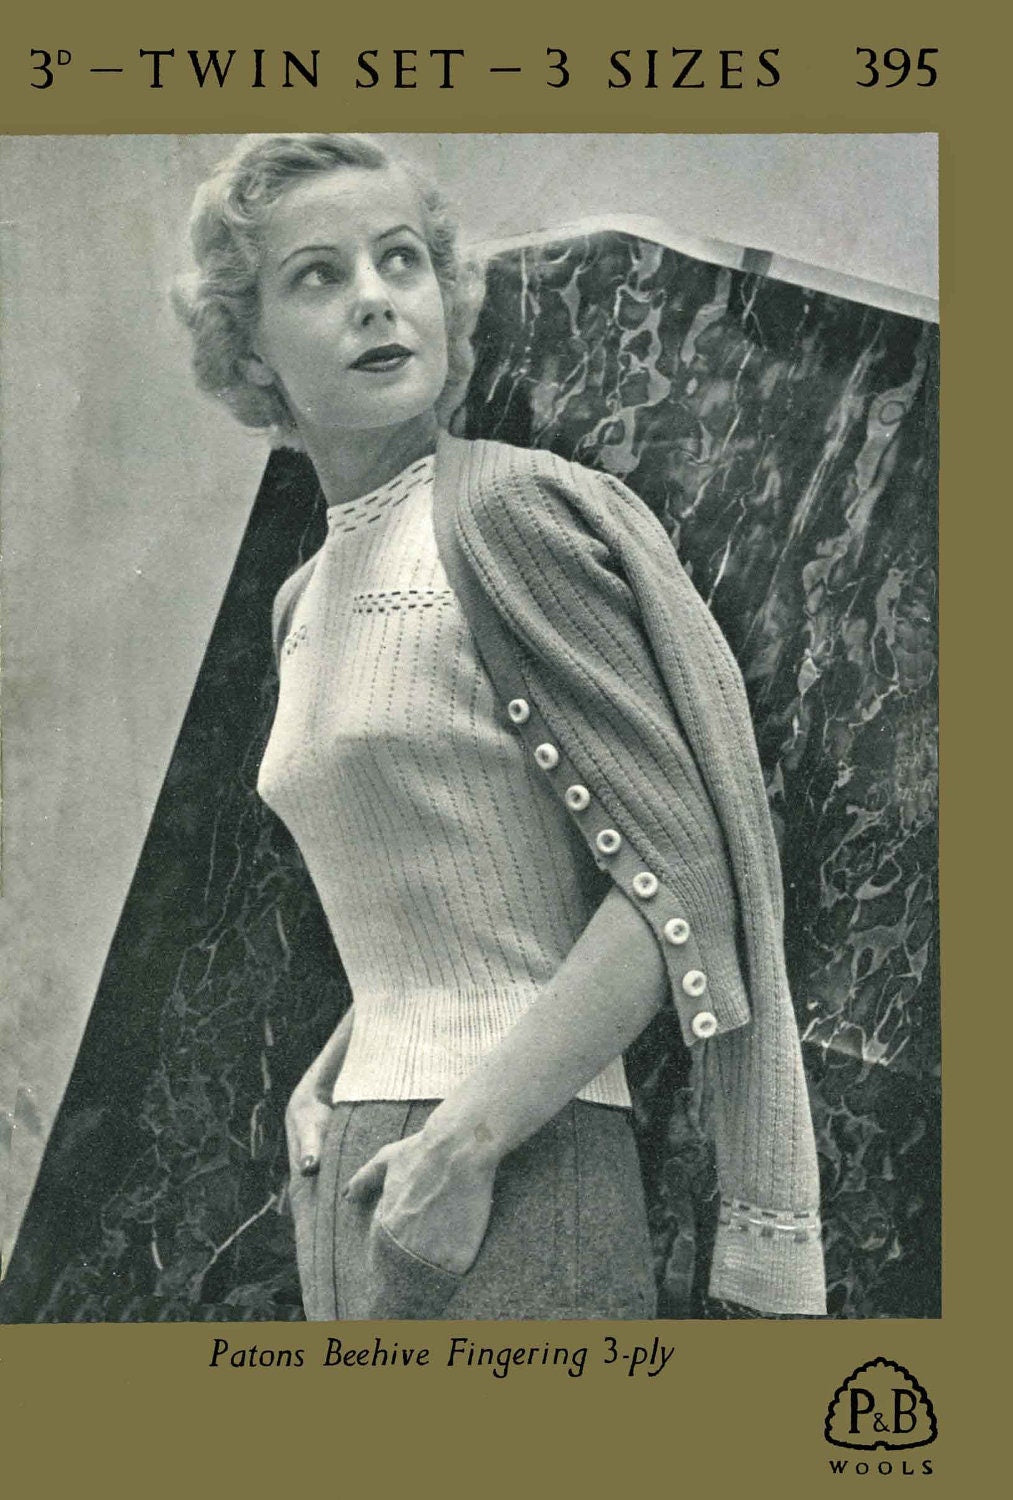 Ladies Twin Set, Jumper and Cardigan, 34"-38" Bust, 3ply, 50s Knitting Pattern, P&B 395